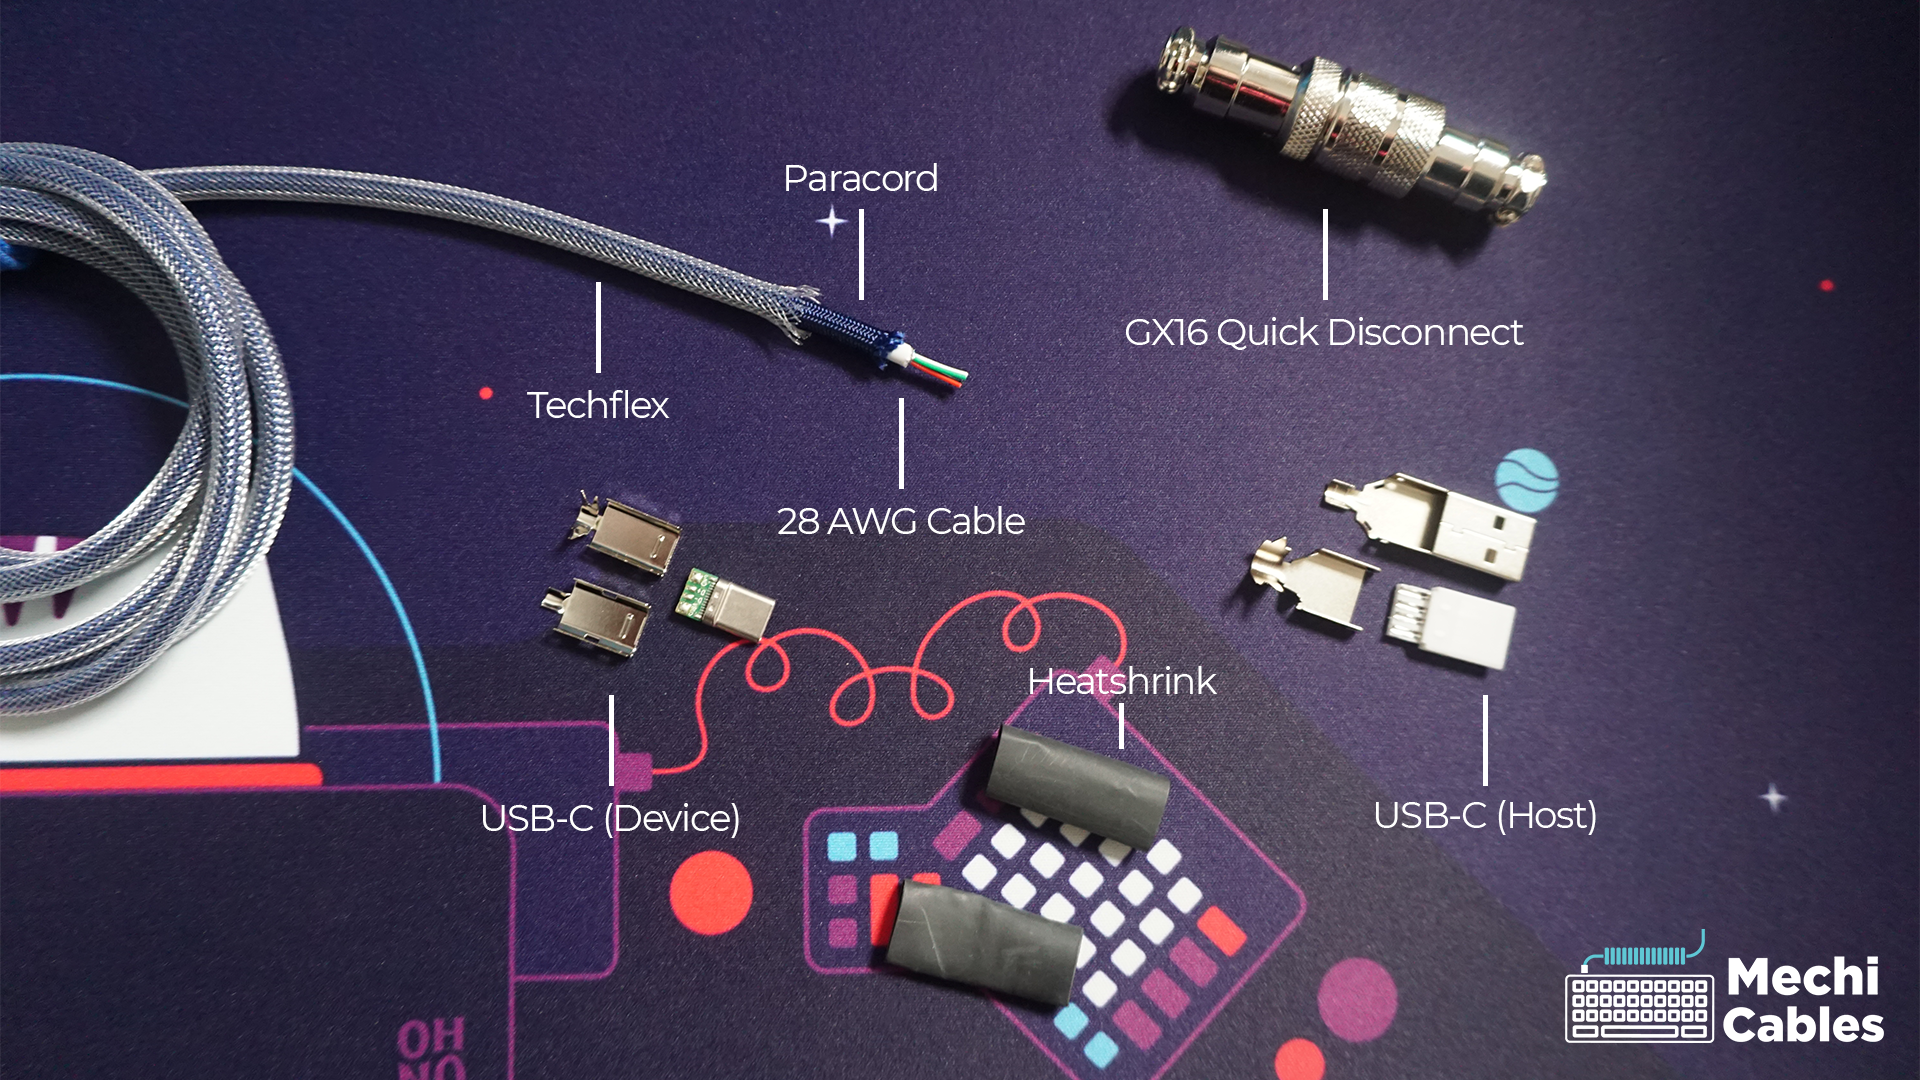 USB keyboard cable with indications of what each part is